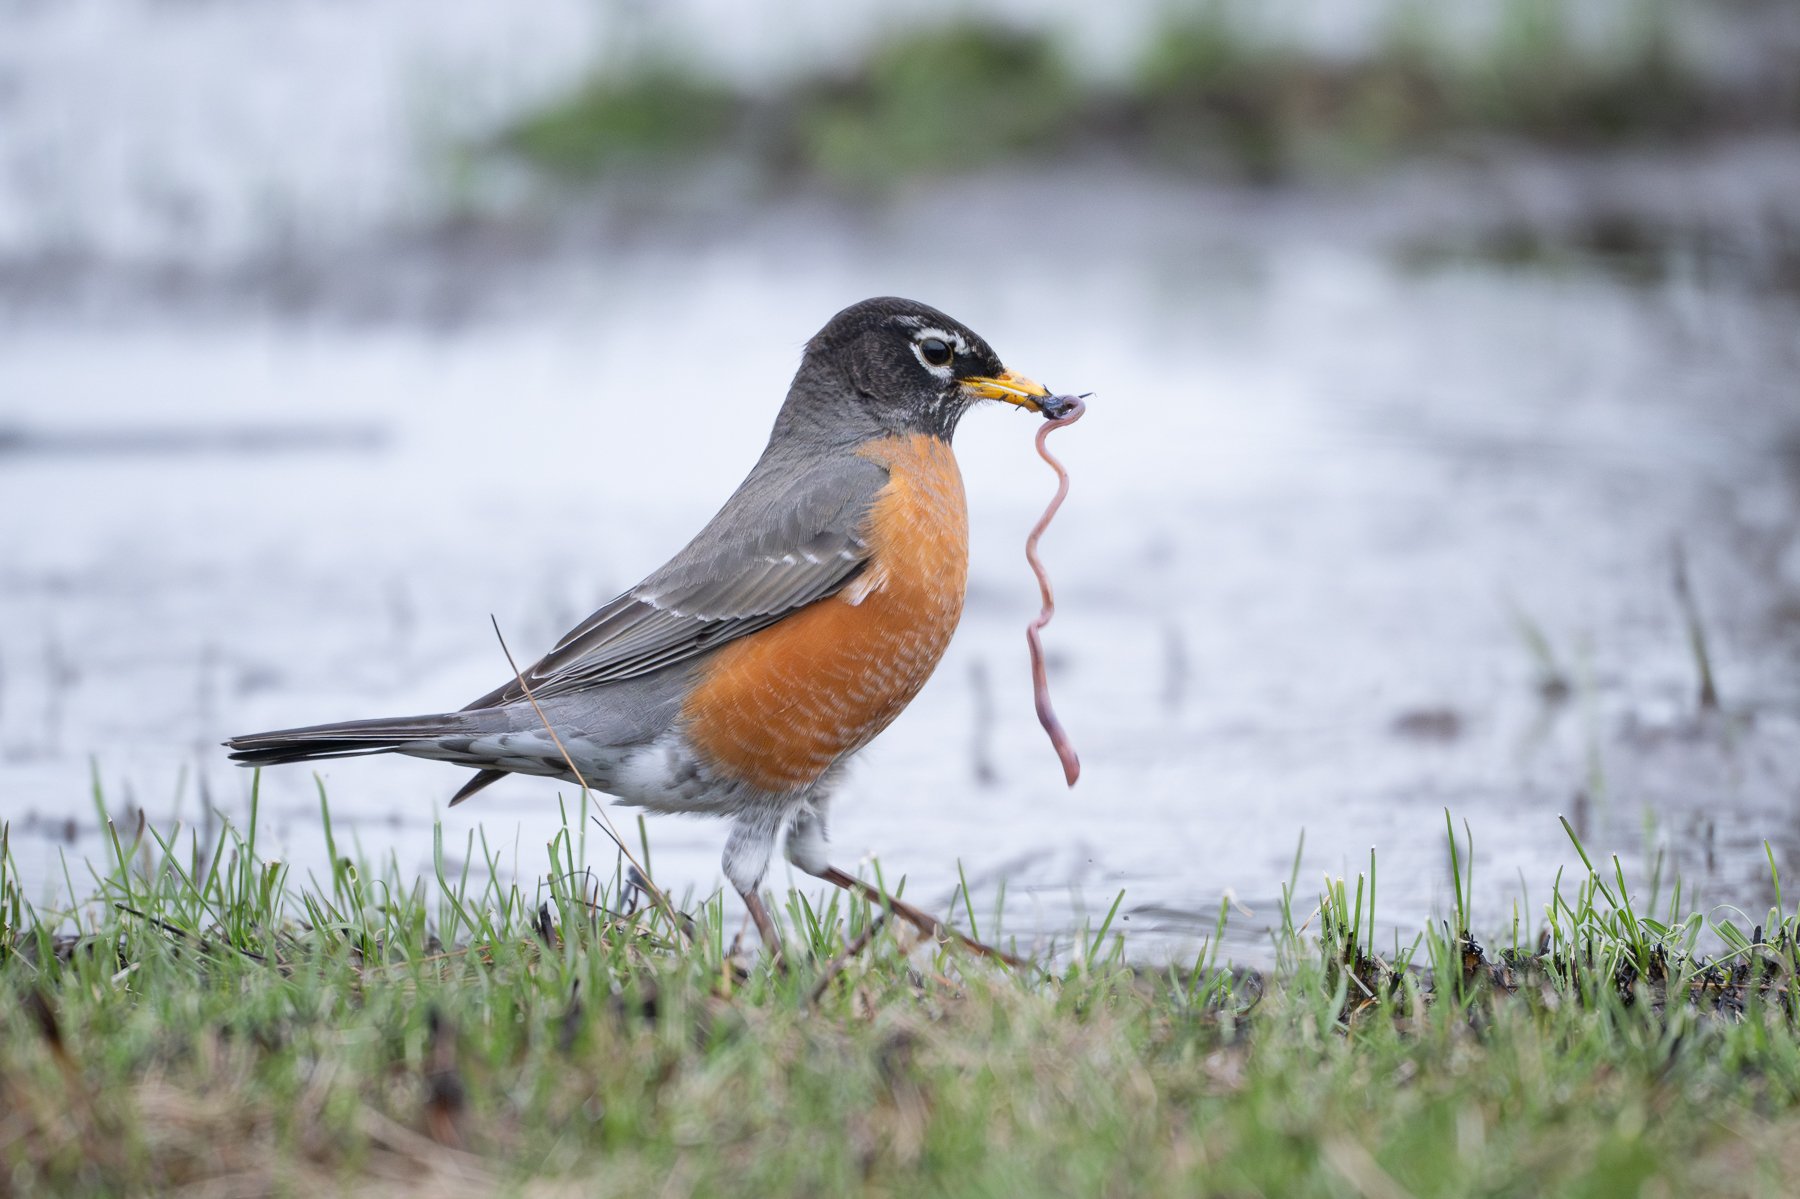   &nbsp;An American Robin with an earthworm pulled from the water (photo by Gary Shackelford).  